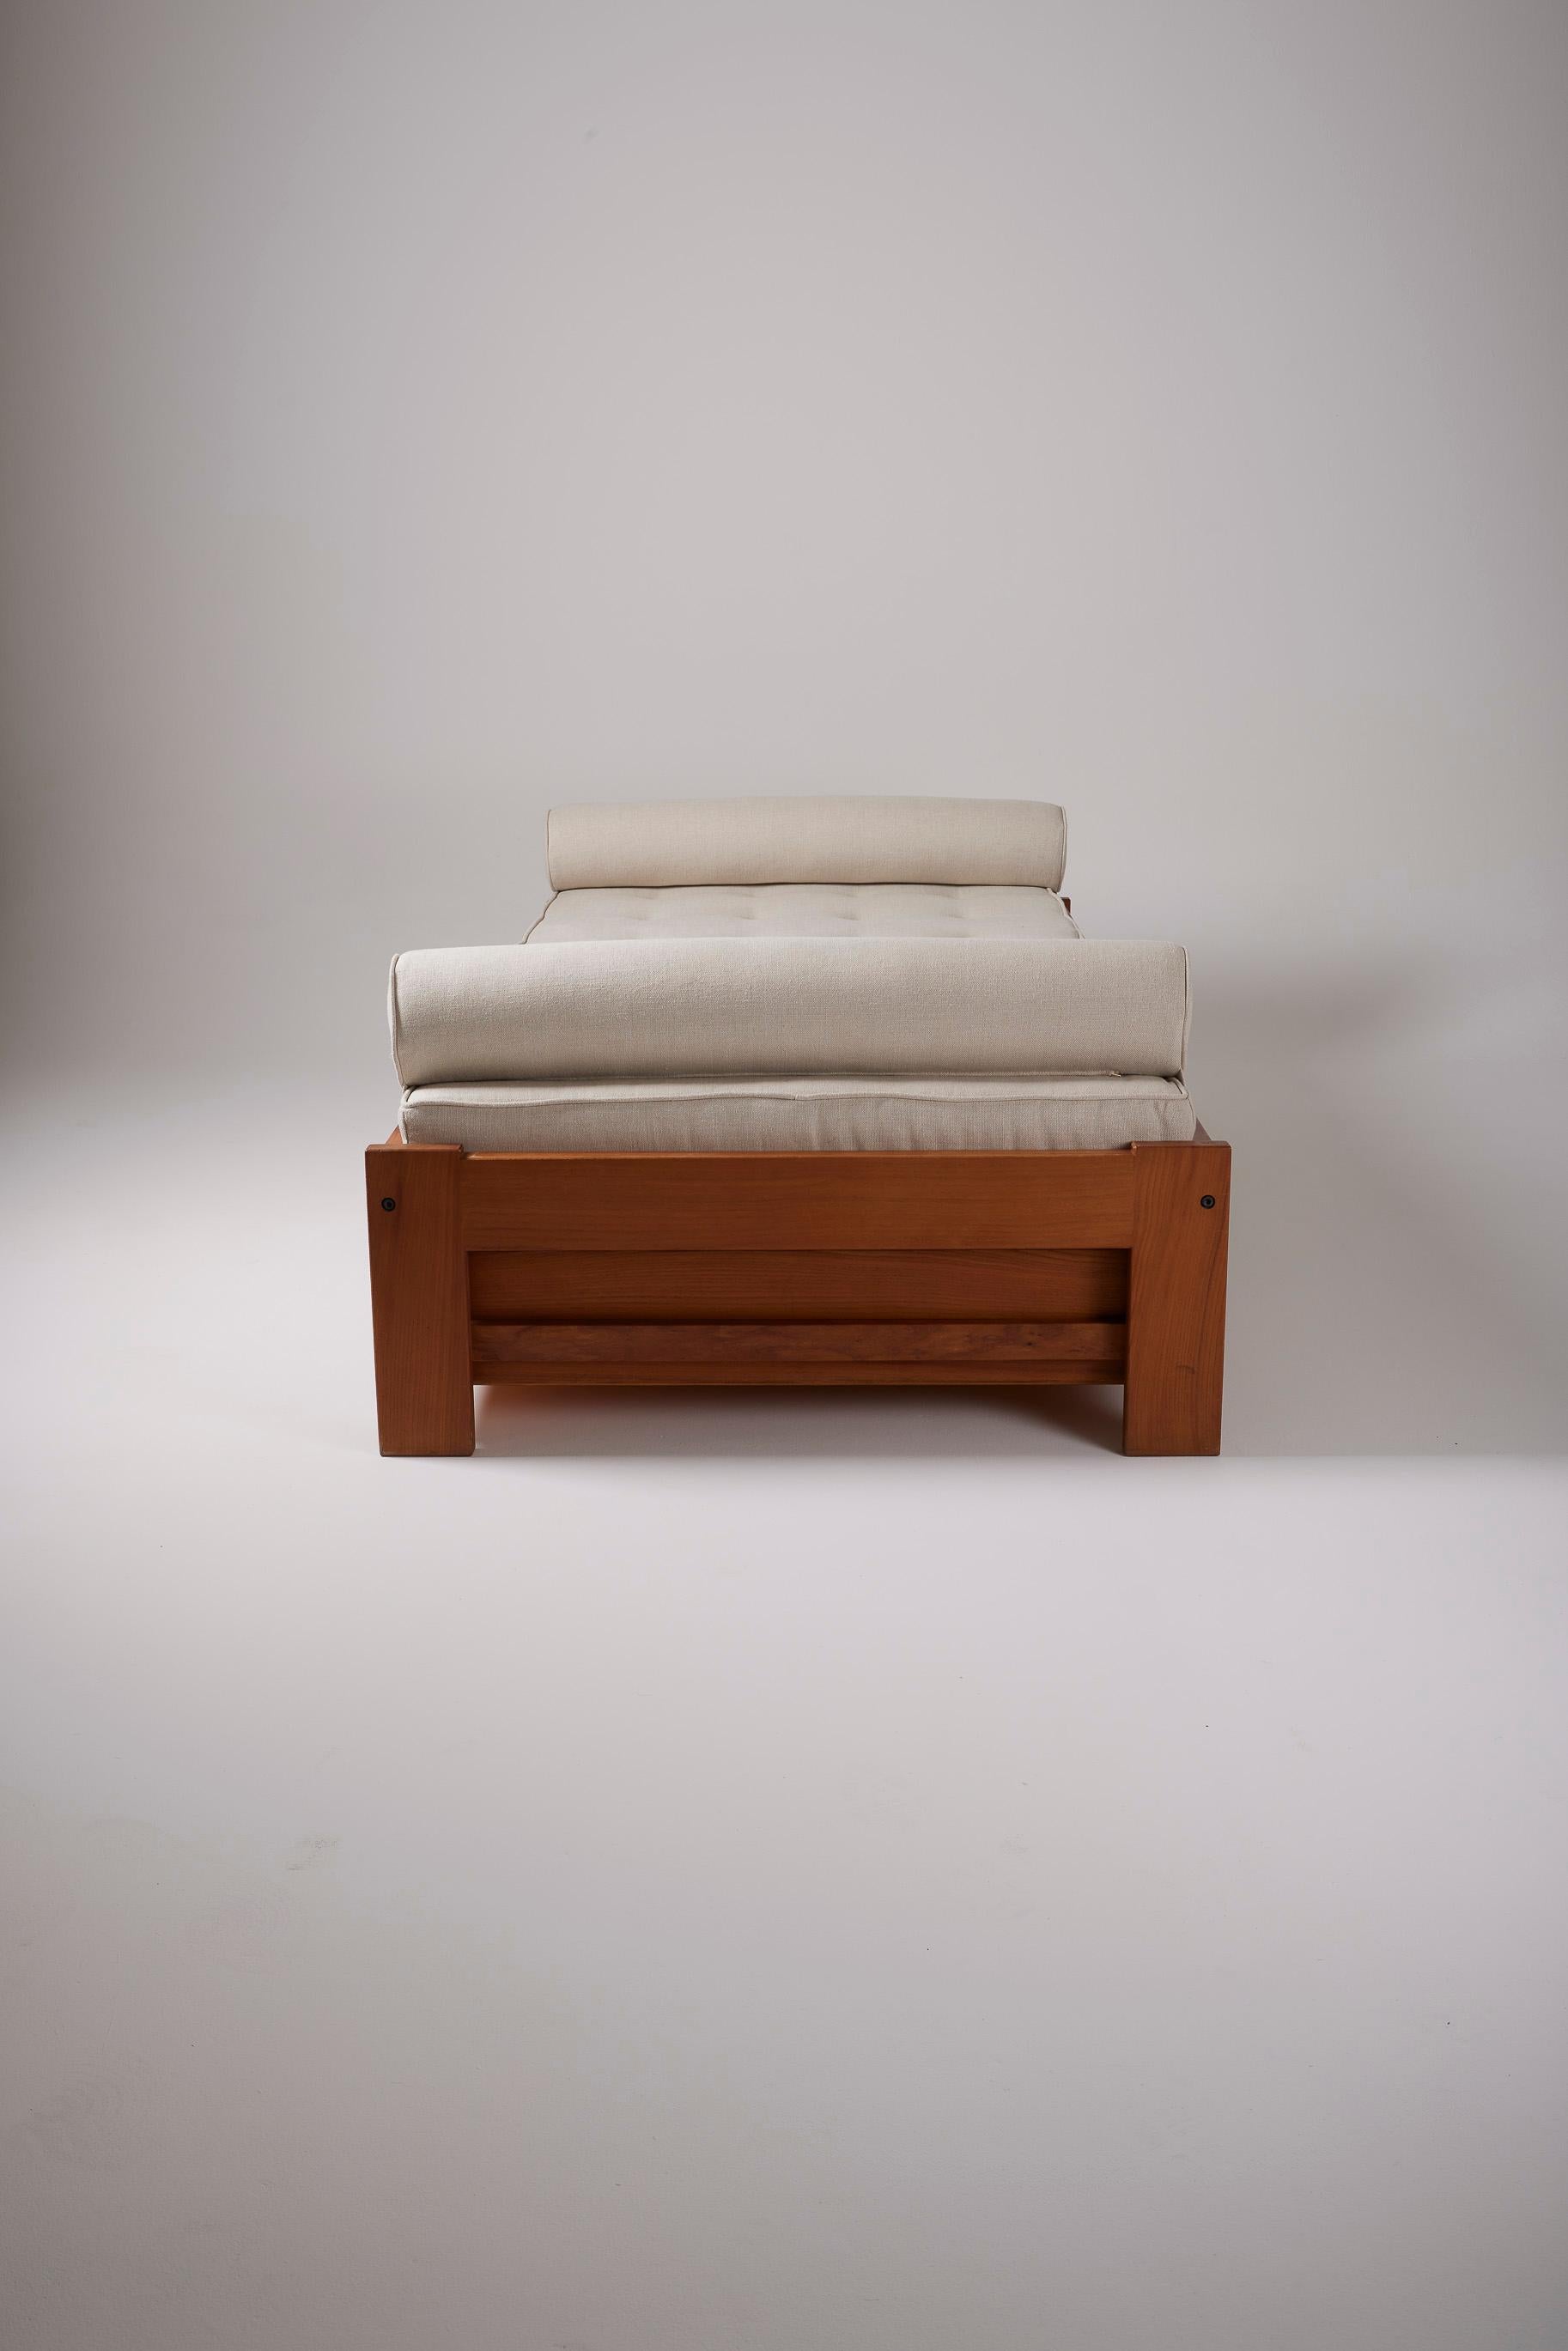 Elm Pierre Chapo Daybed